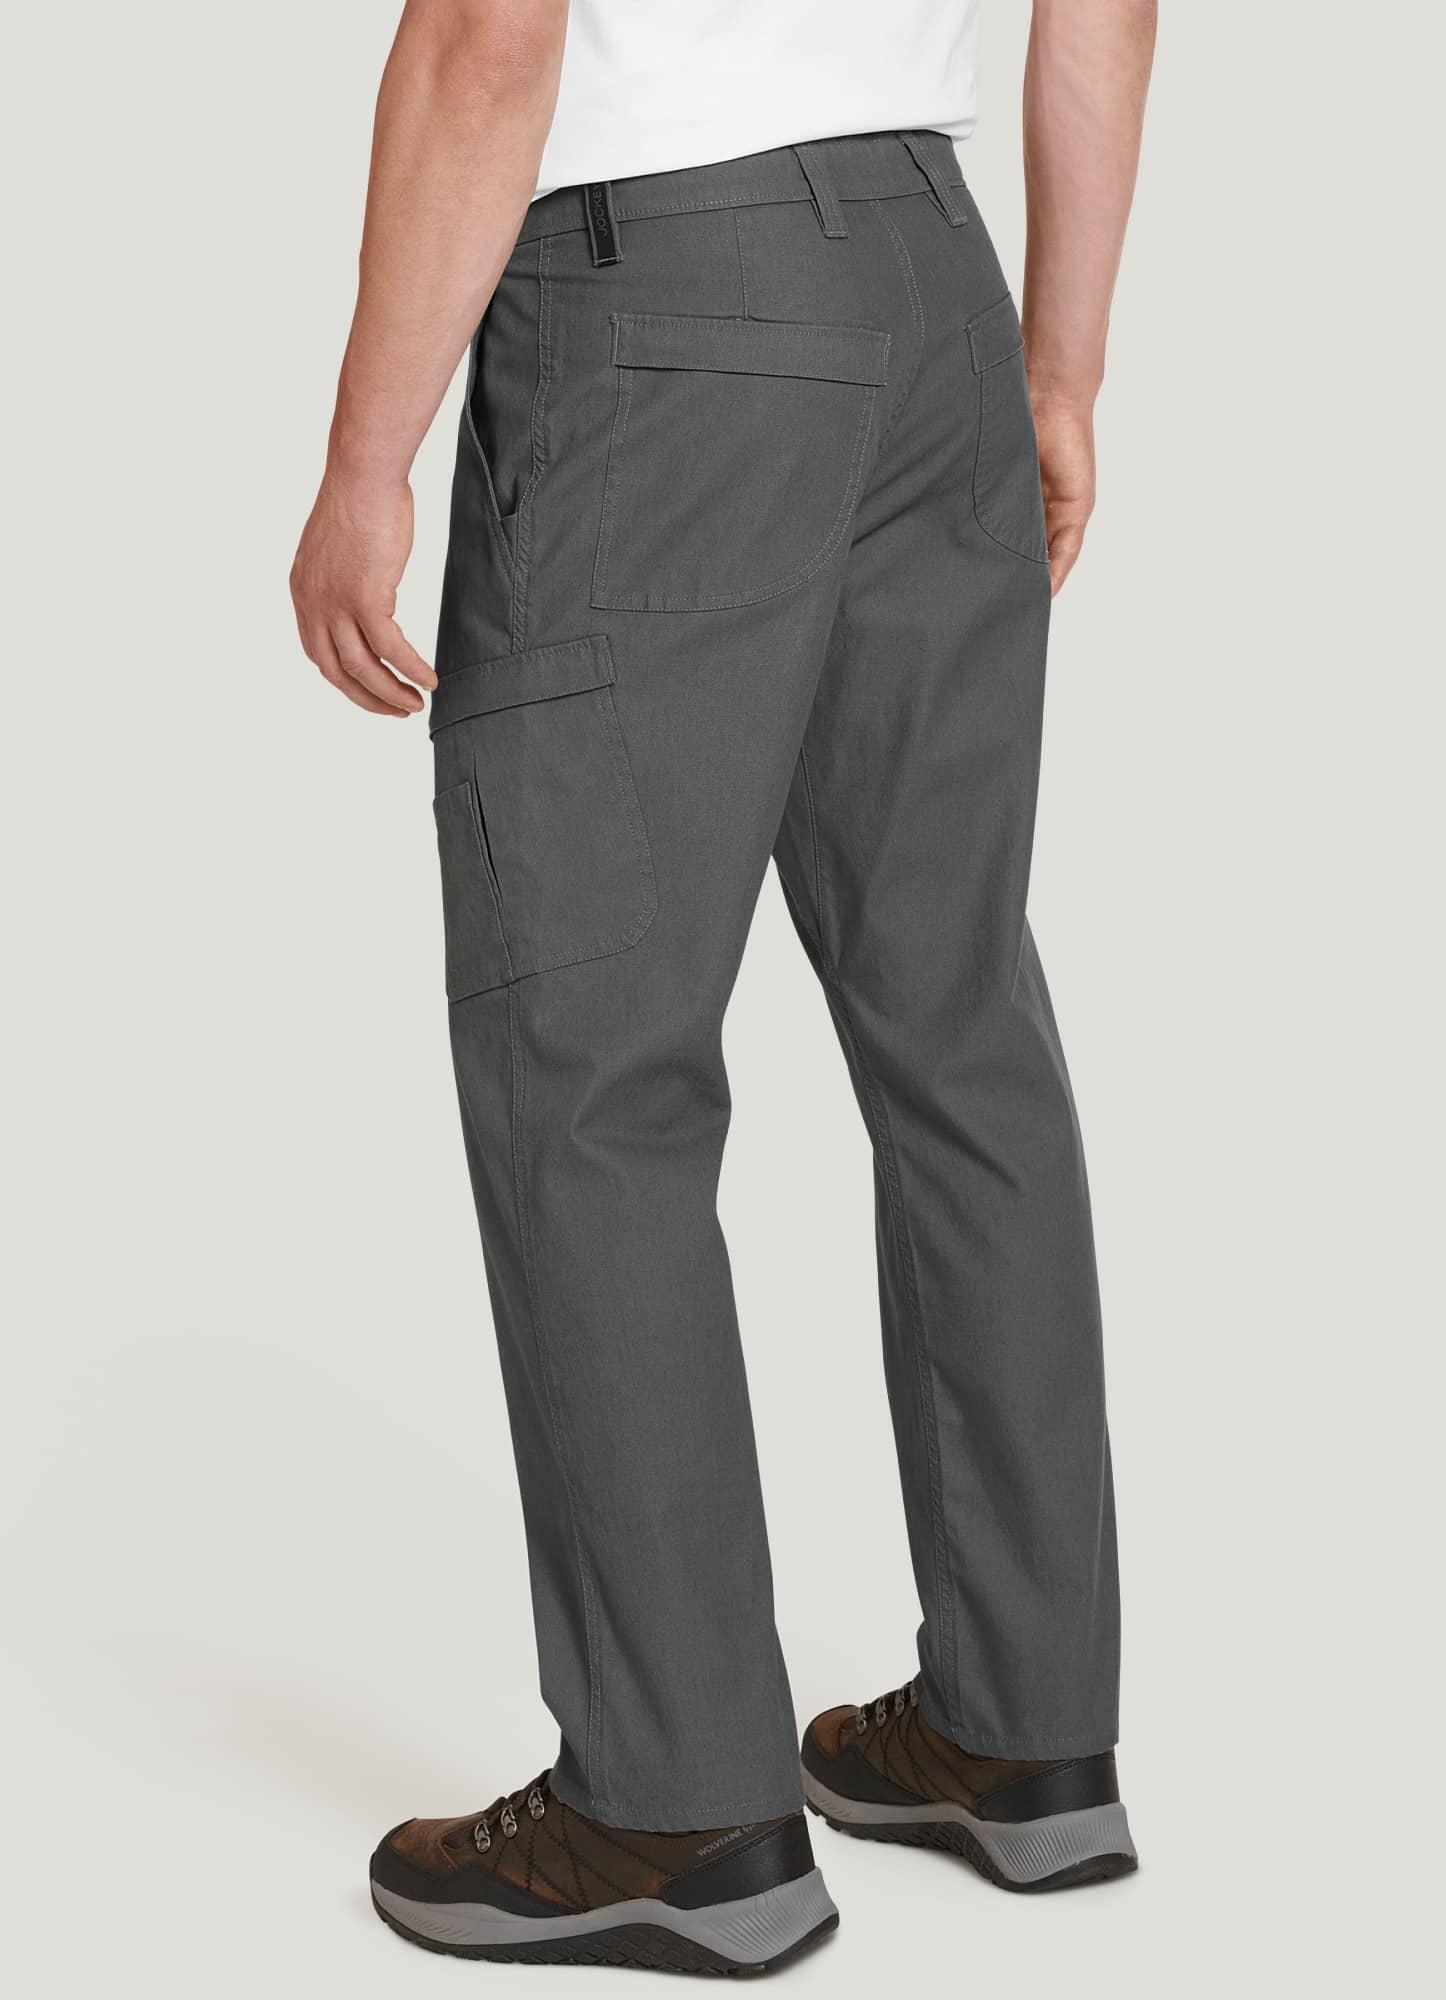 A quick and easy tutorial on how to tighten those loose cargo waists! , Cargos